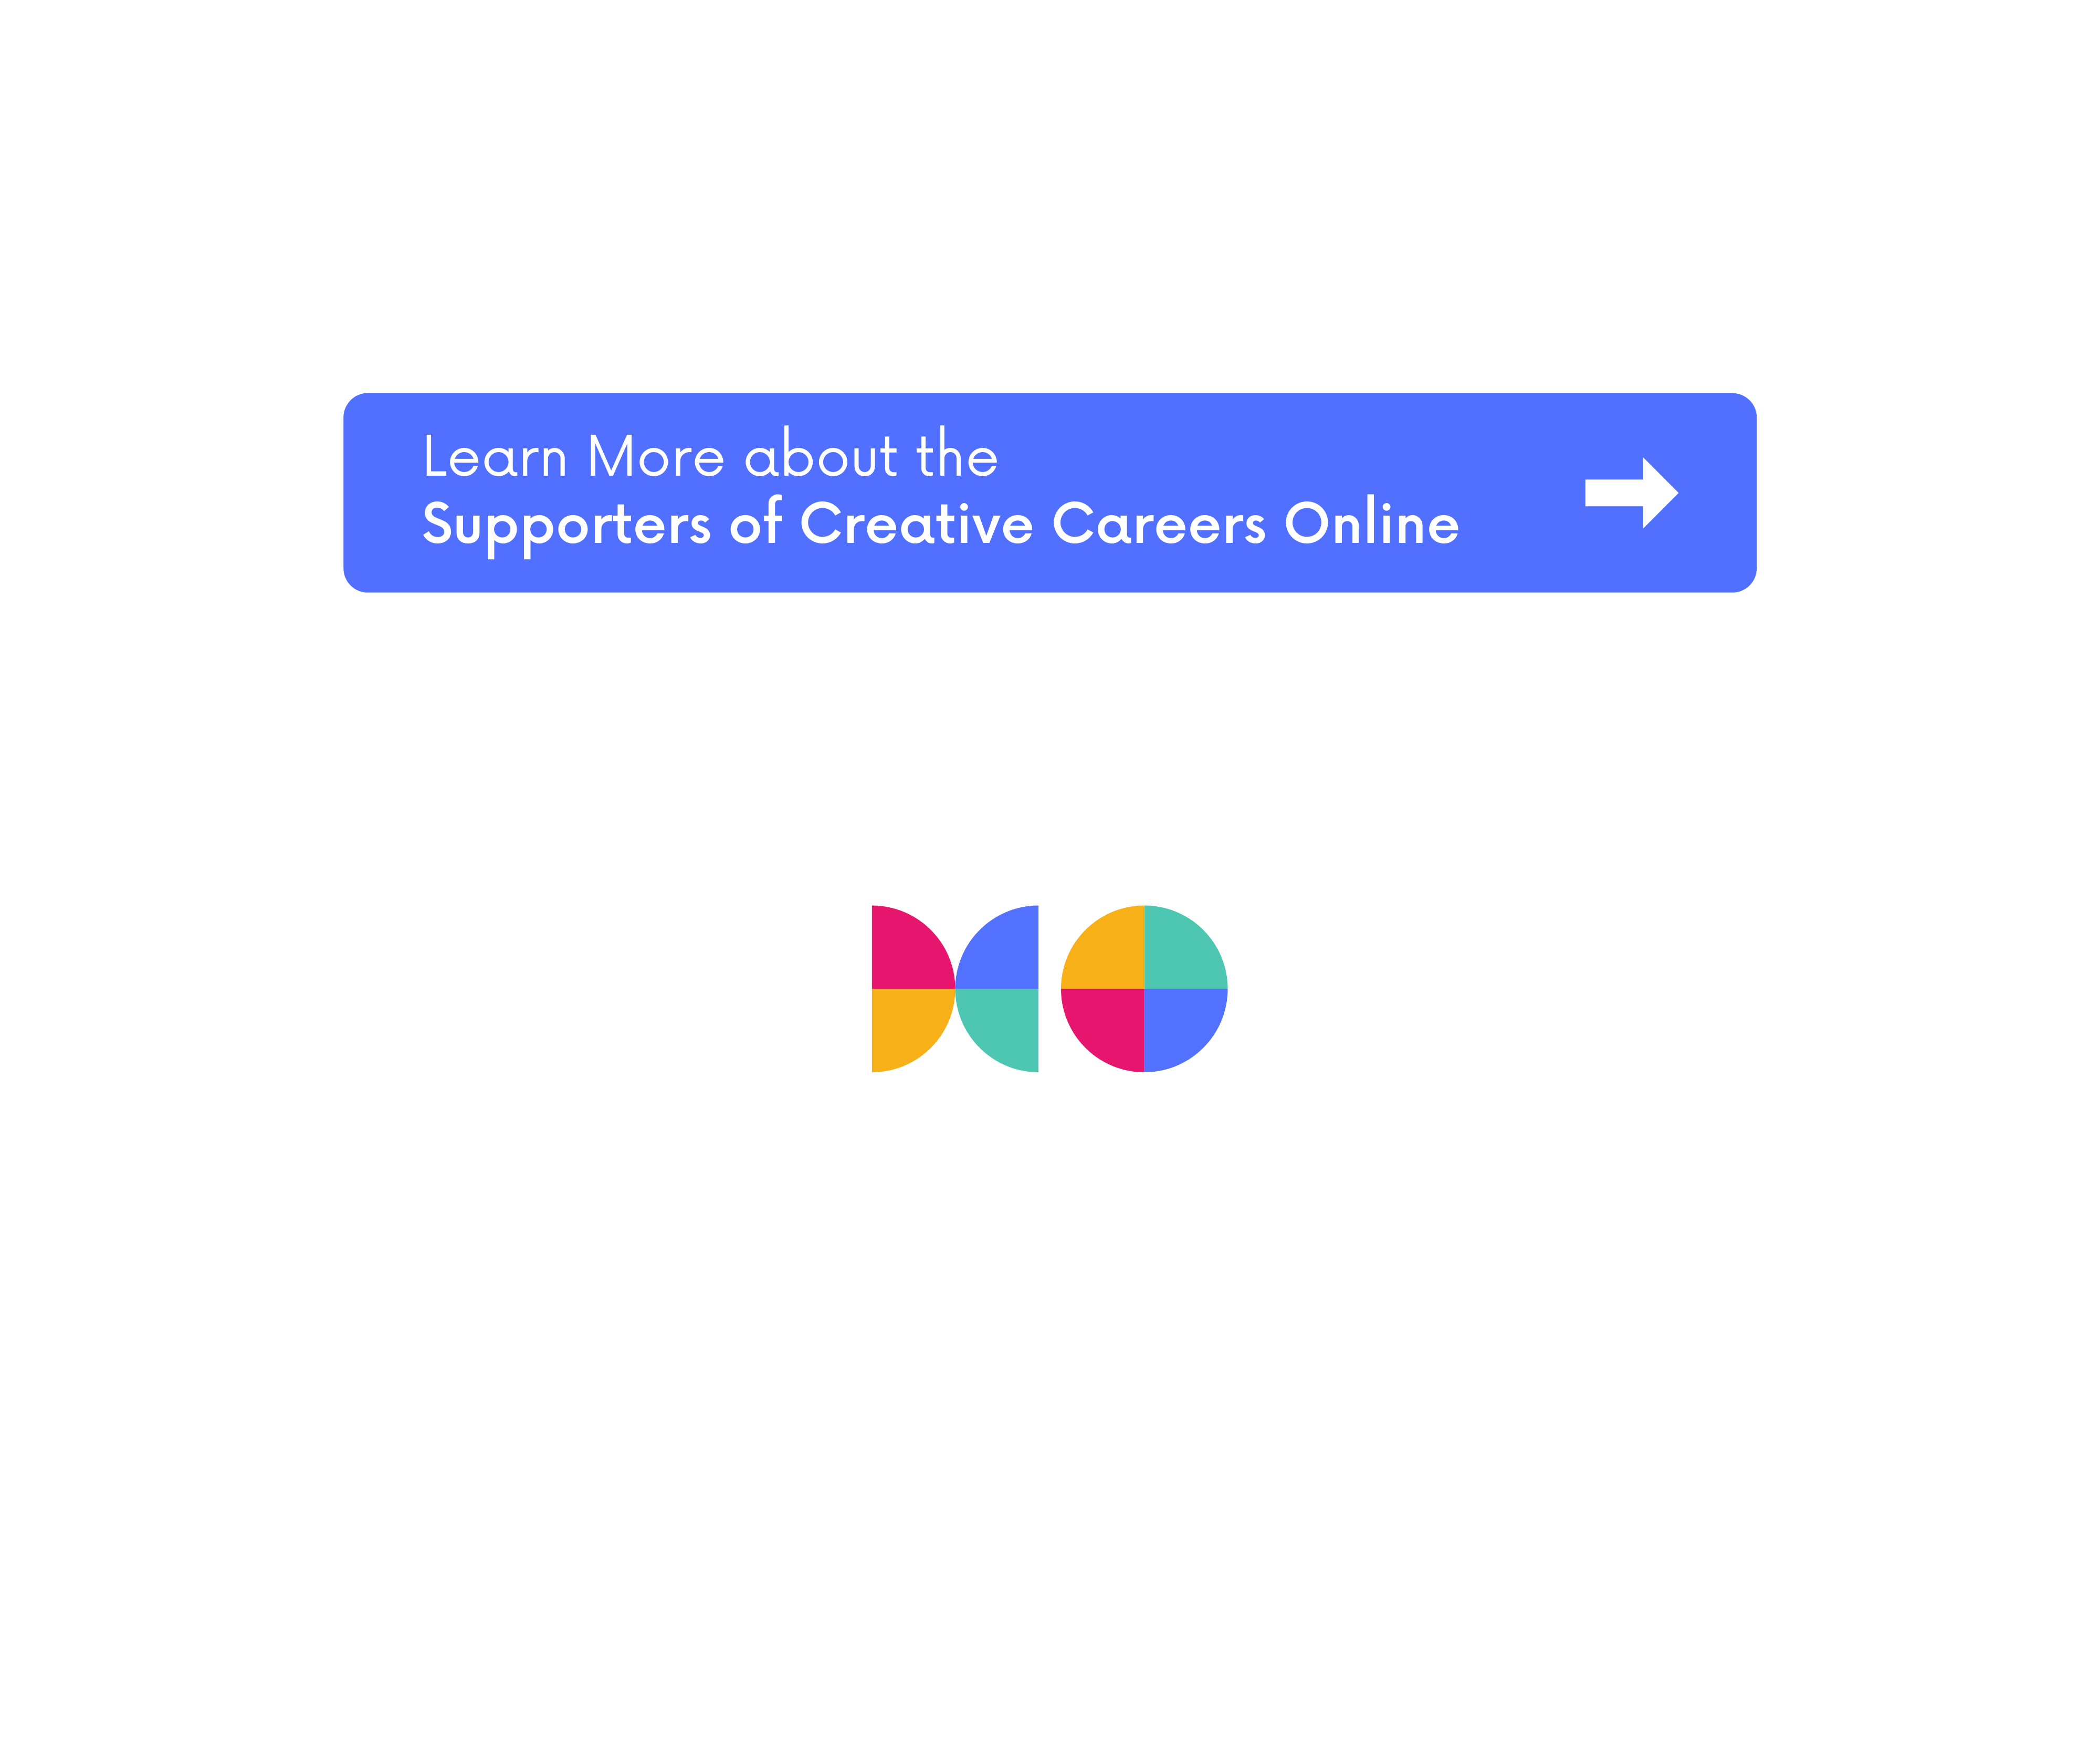 Learn More about the Supporters of Creative Careers Online